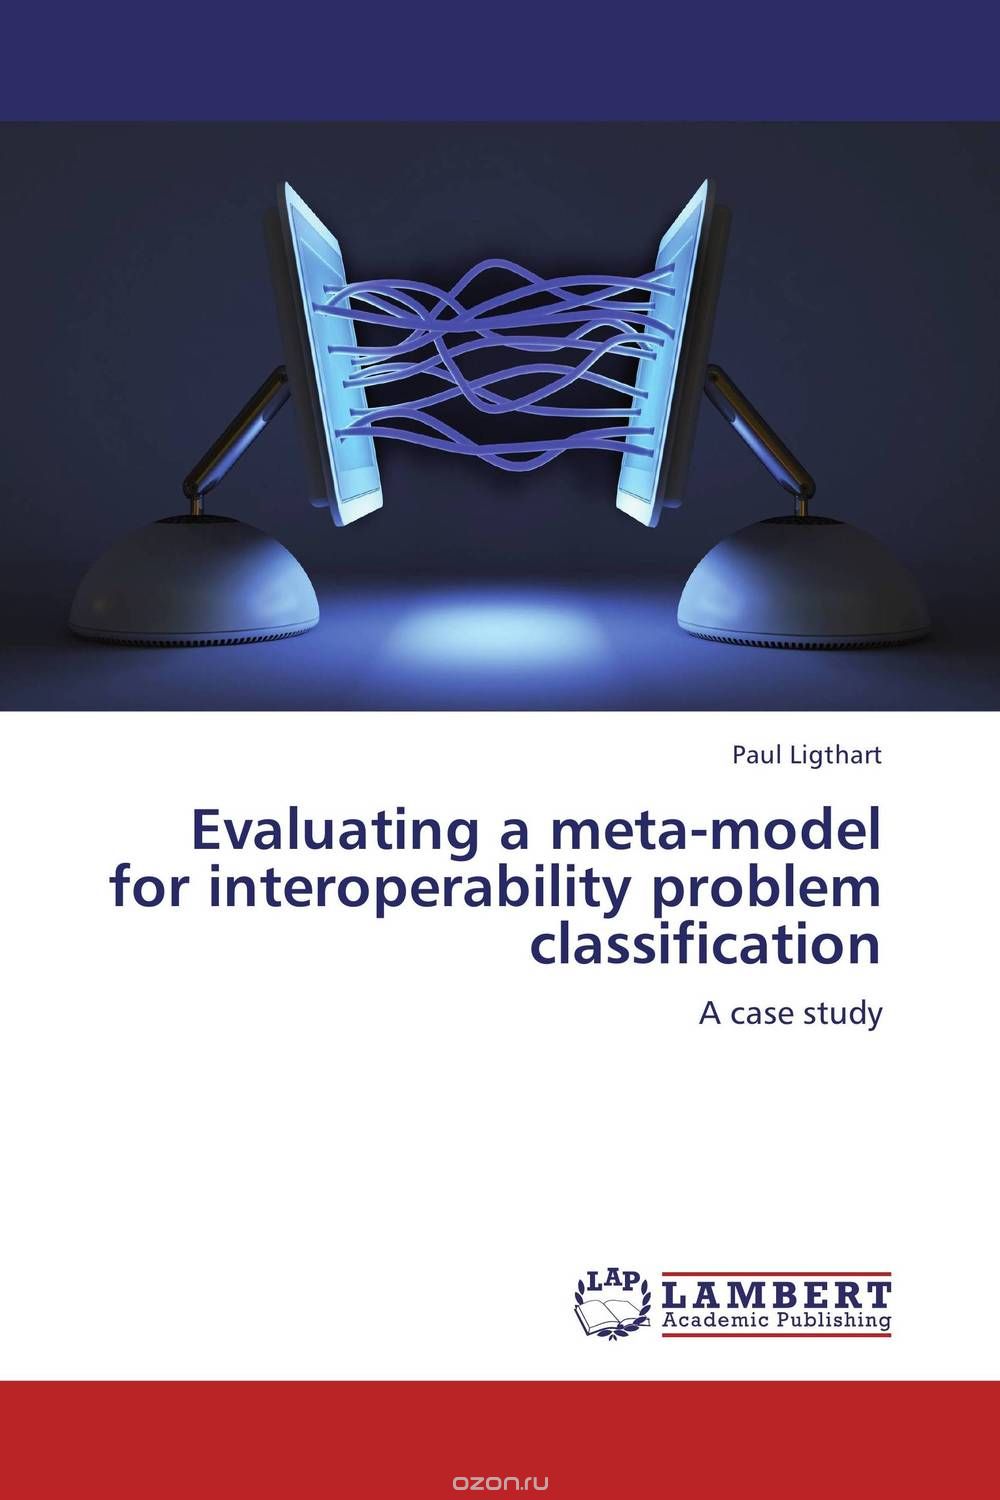 Evaluating a meta-model for interoperability problem classification